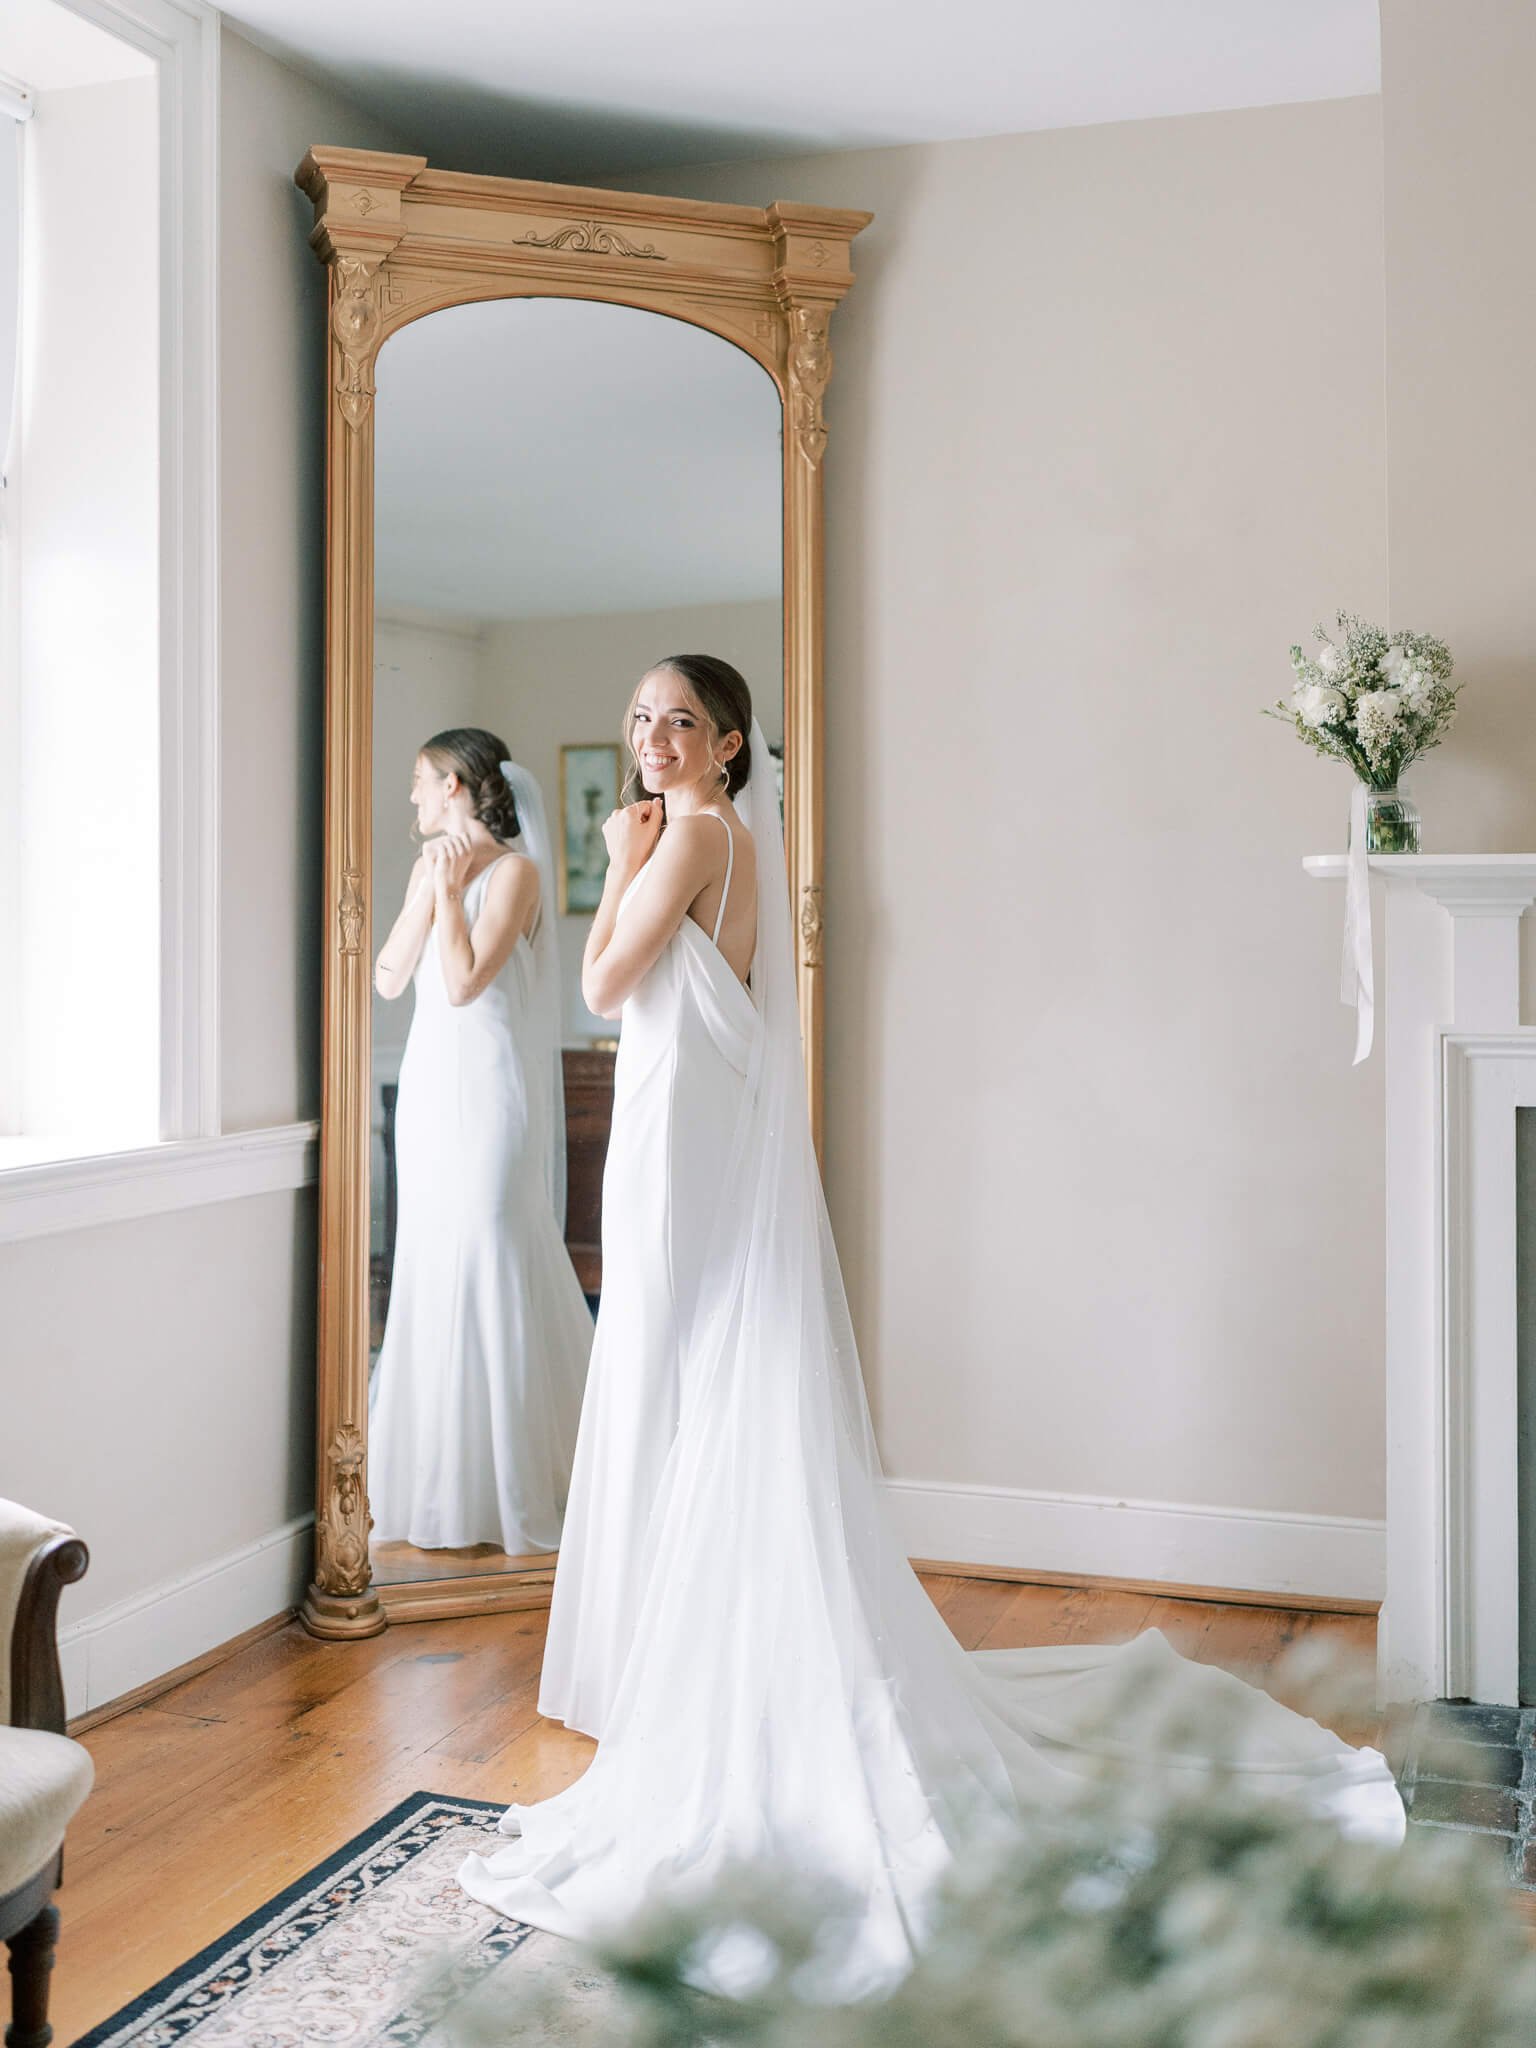 A bride in her wedding gown in front of a mirror, looking back over her shoulder.